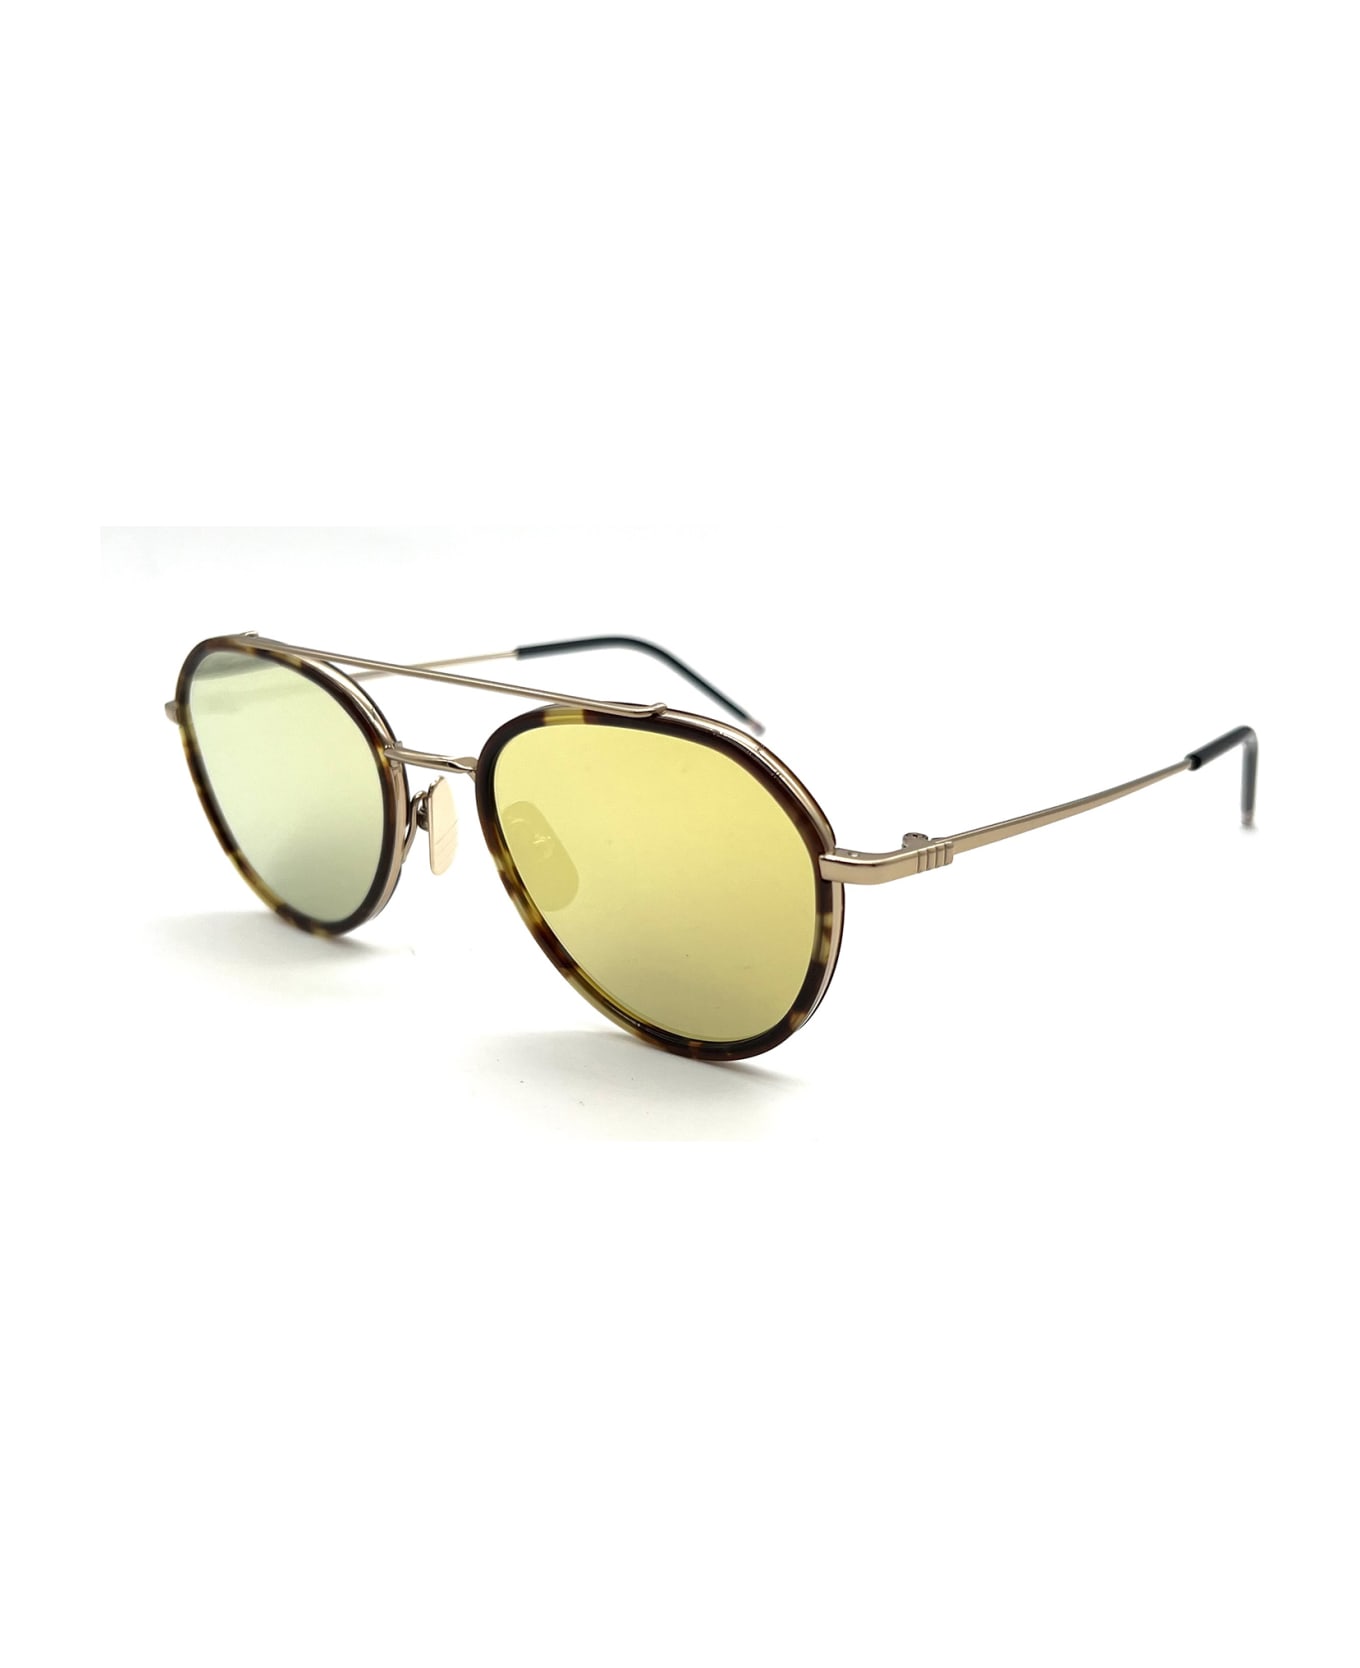 Thom Browne UES801A/G0003 Sunglasses - Med Brown サングラス